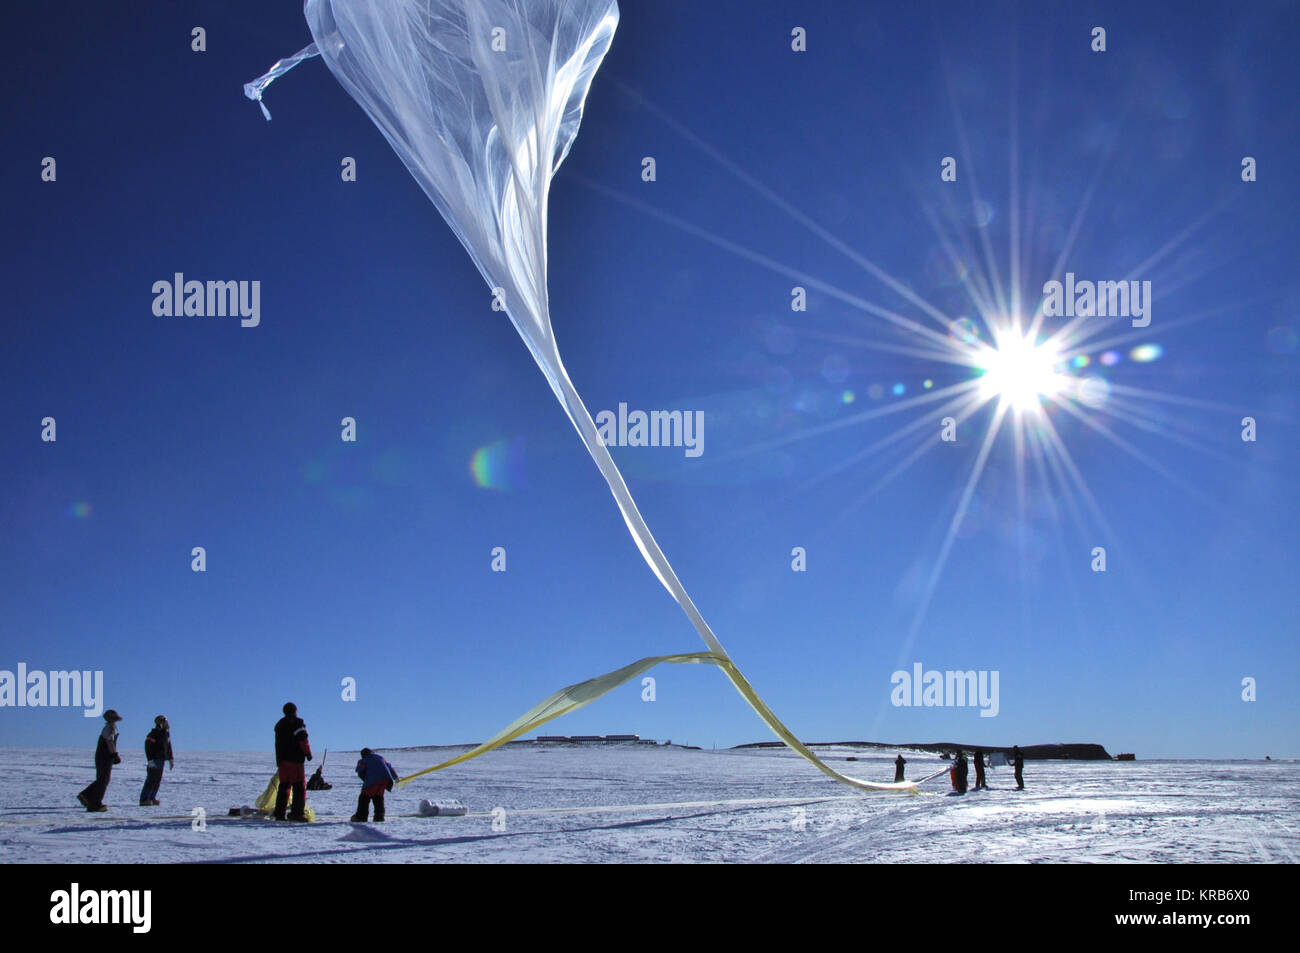 Some of the BARREL balloon launches took place at the South African National Antarctic Expedition Research base, called SANAE IV, the others at Halley Research Station. This balloon is taking flight at SANAE IV.   Credit: NASA  ---  In Antarctica in January, 2013 – the summer at the South Pole – scientists launched 20 balloons up into the air to study an enduring mystery of space weather: when the giant radiation belts surrounding Earth lose material, where do the extra particles actually go? The mission is called BARREL (Balloon Array for Radiation belt Relativistic Electron Losses) and it is Stock Photo